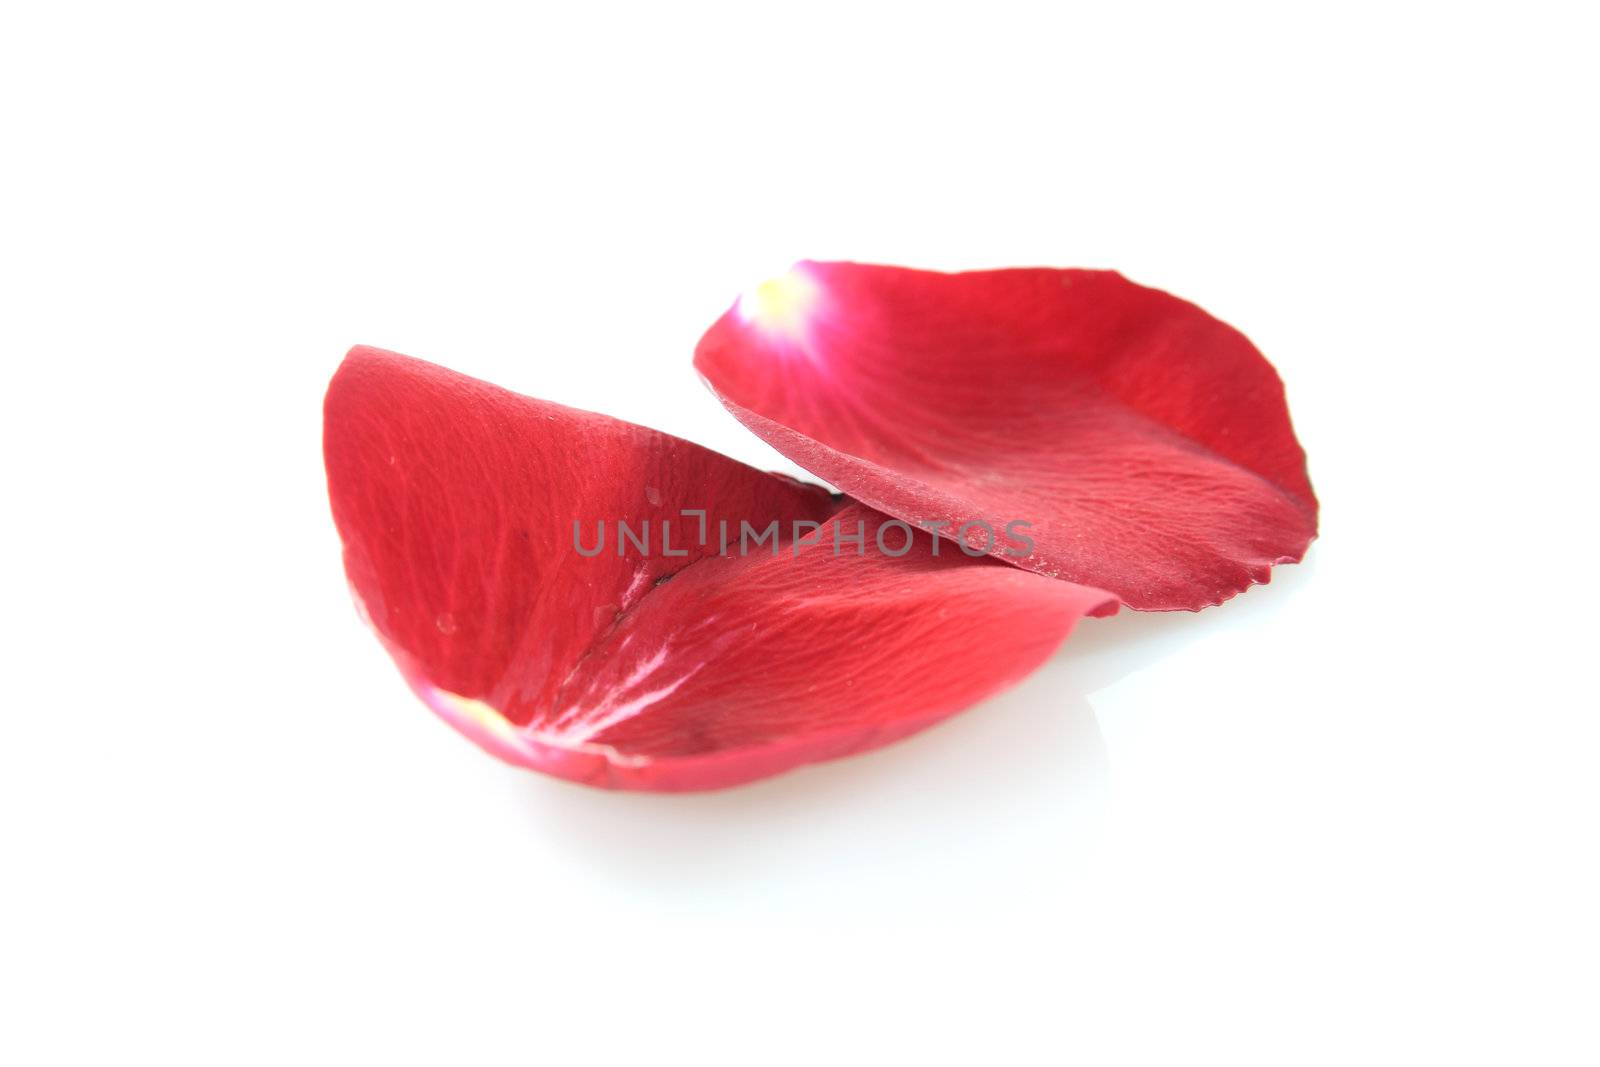 Petals of a rose, on a white background.